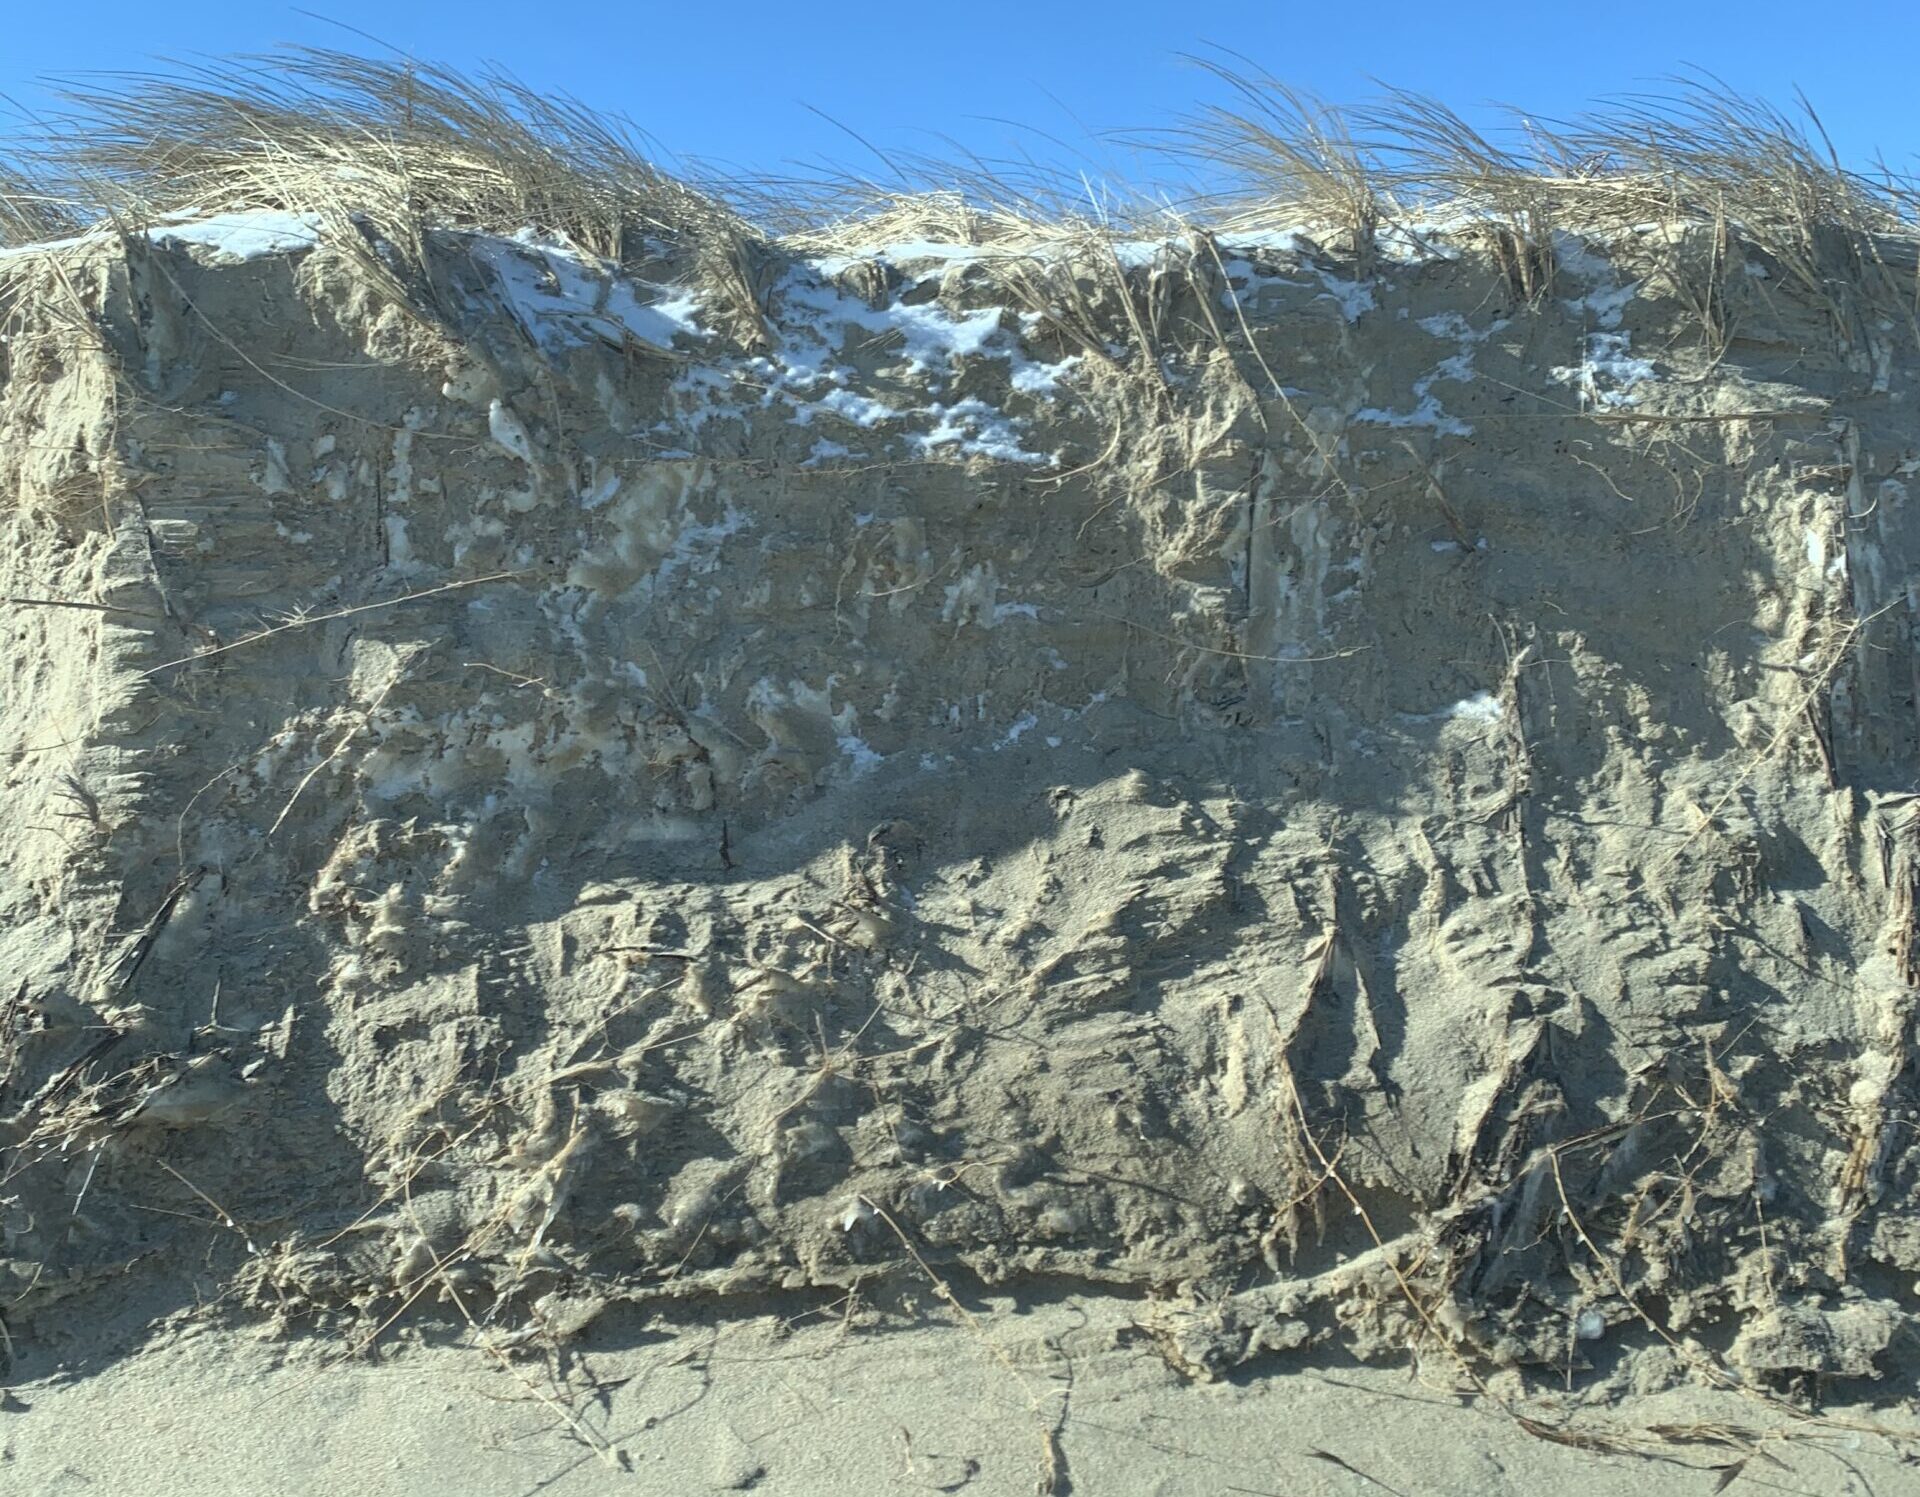 Up-close look at the scouring of the entire east beach dunes on Coskata Coatue, Nantucket, following the winter nor'easter of January 22 (Trustees photo)